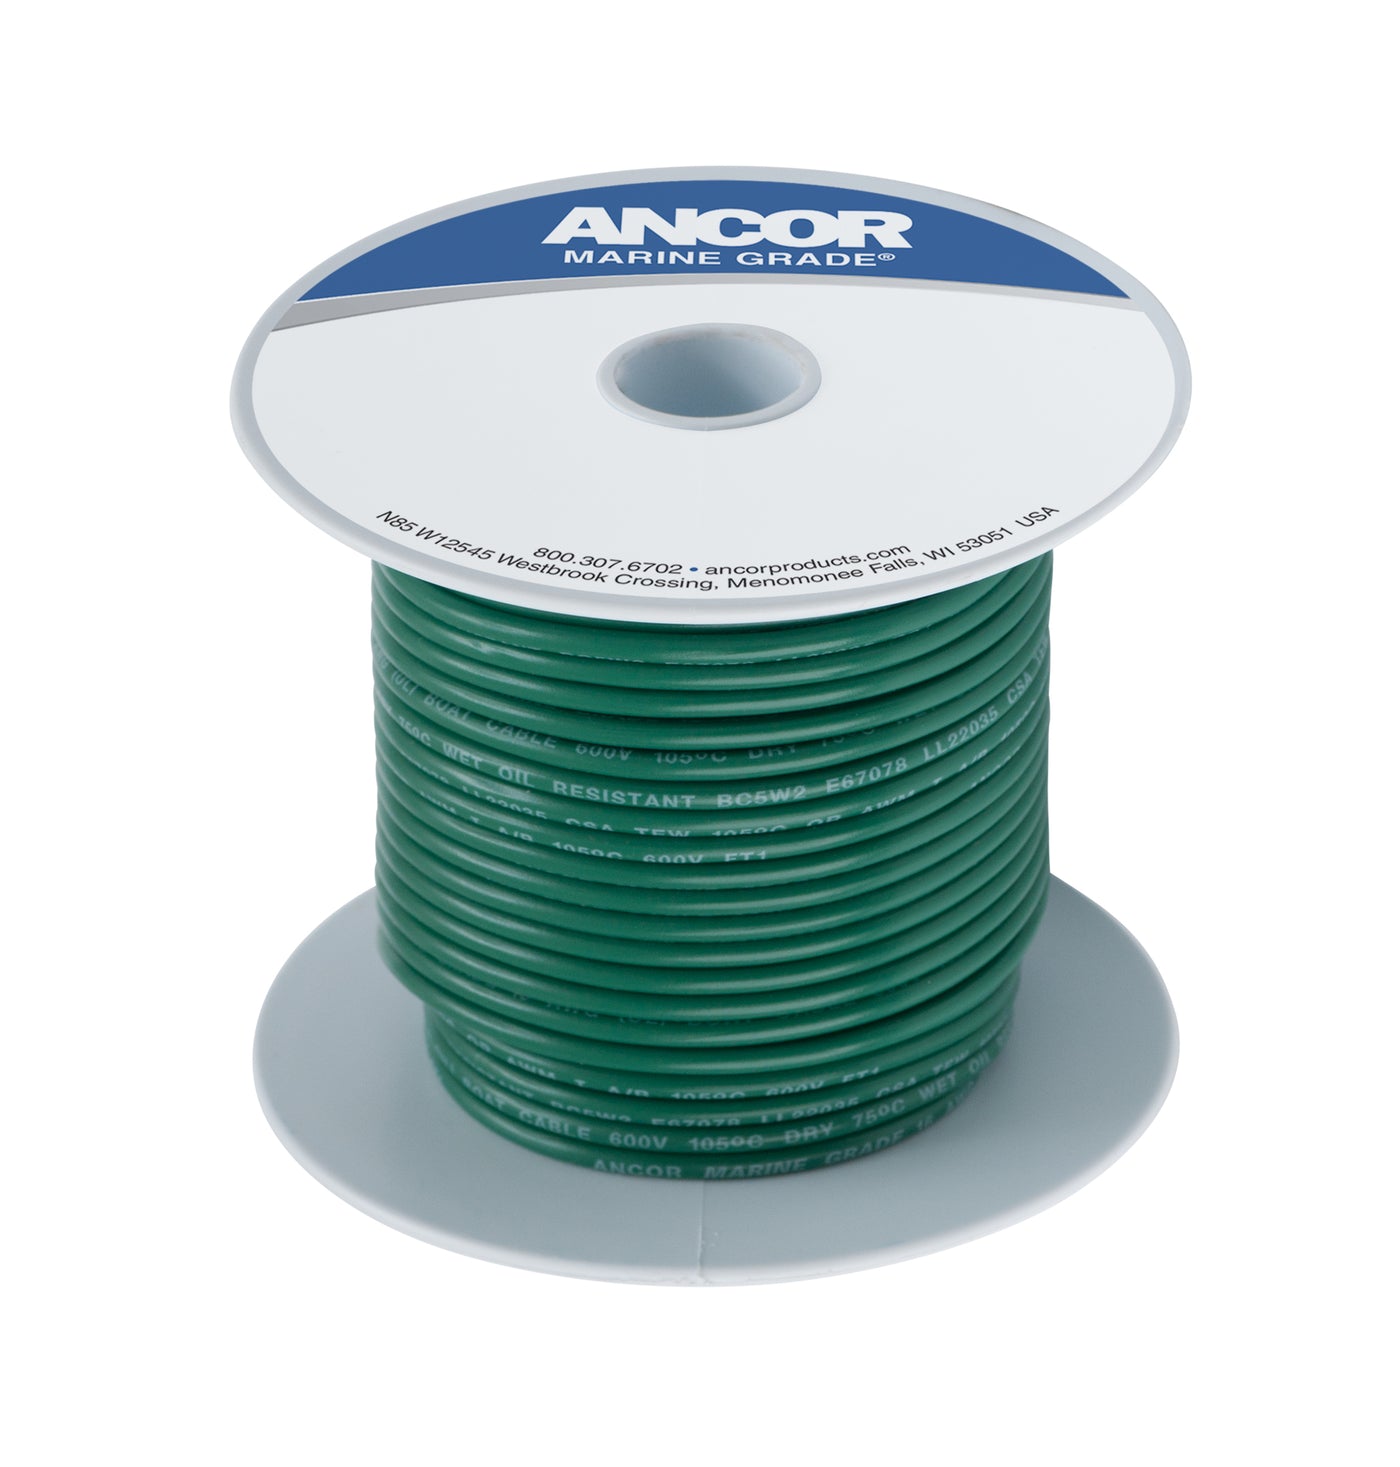 Ancor 111350 Tinned Copper Wire, 8 AWG (8mm²), Green - 500ft